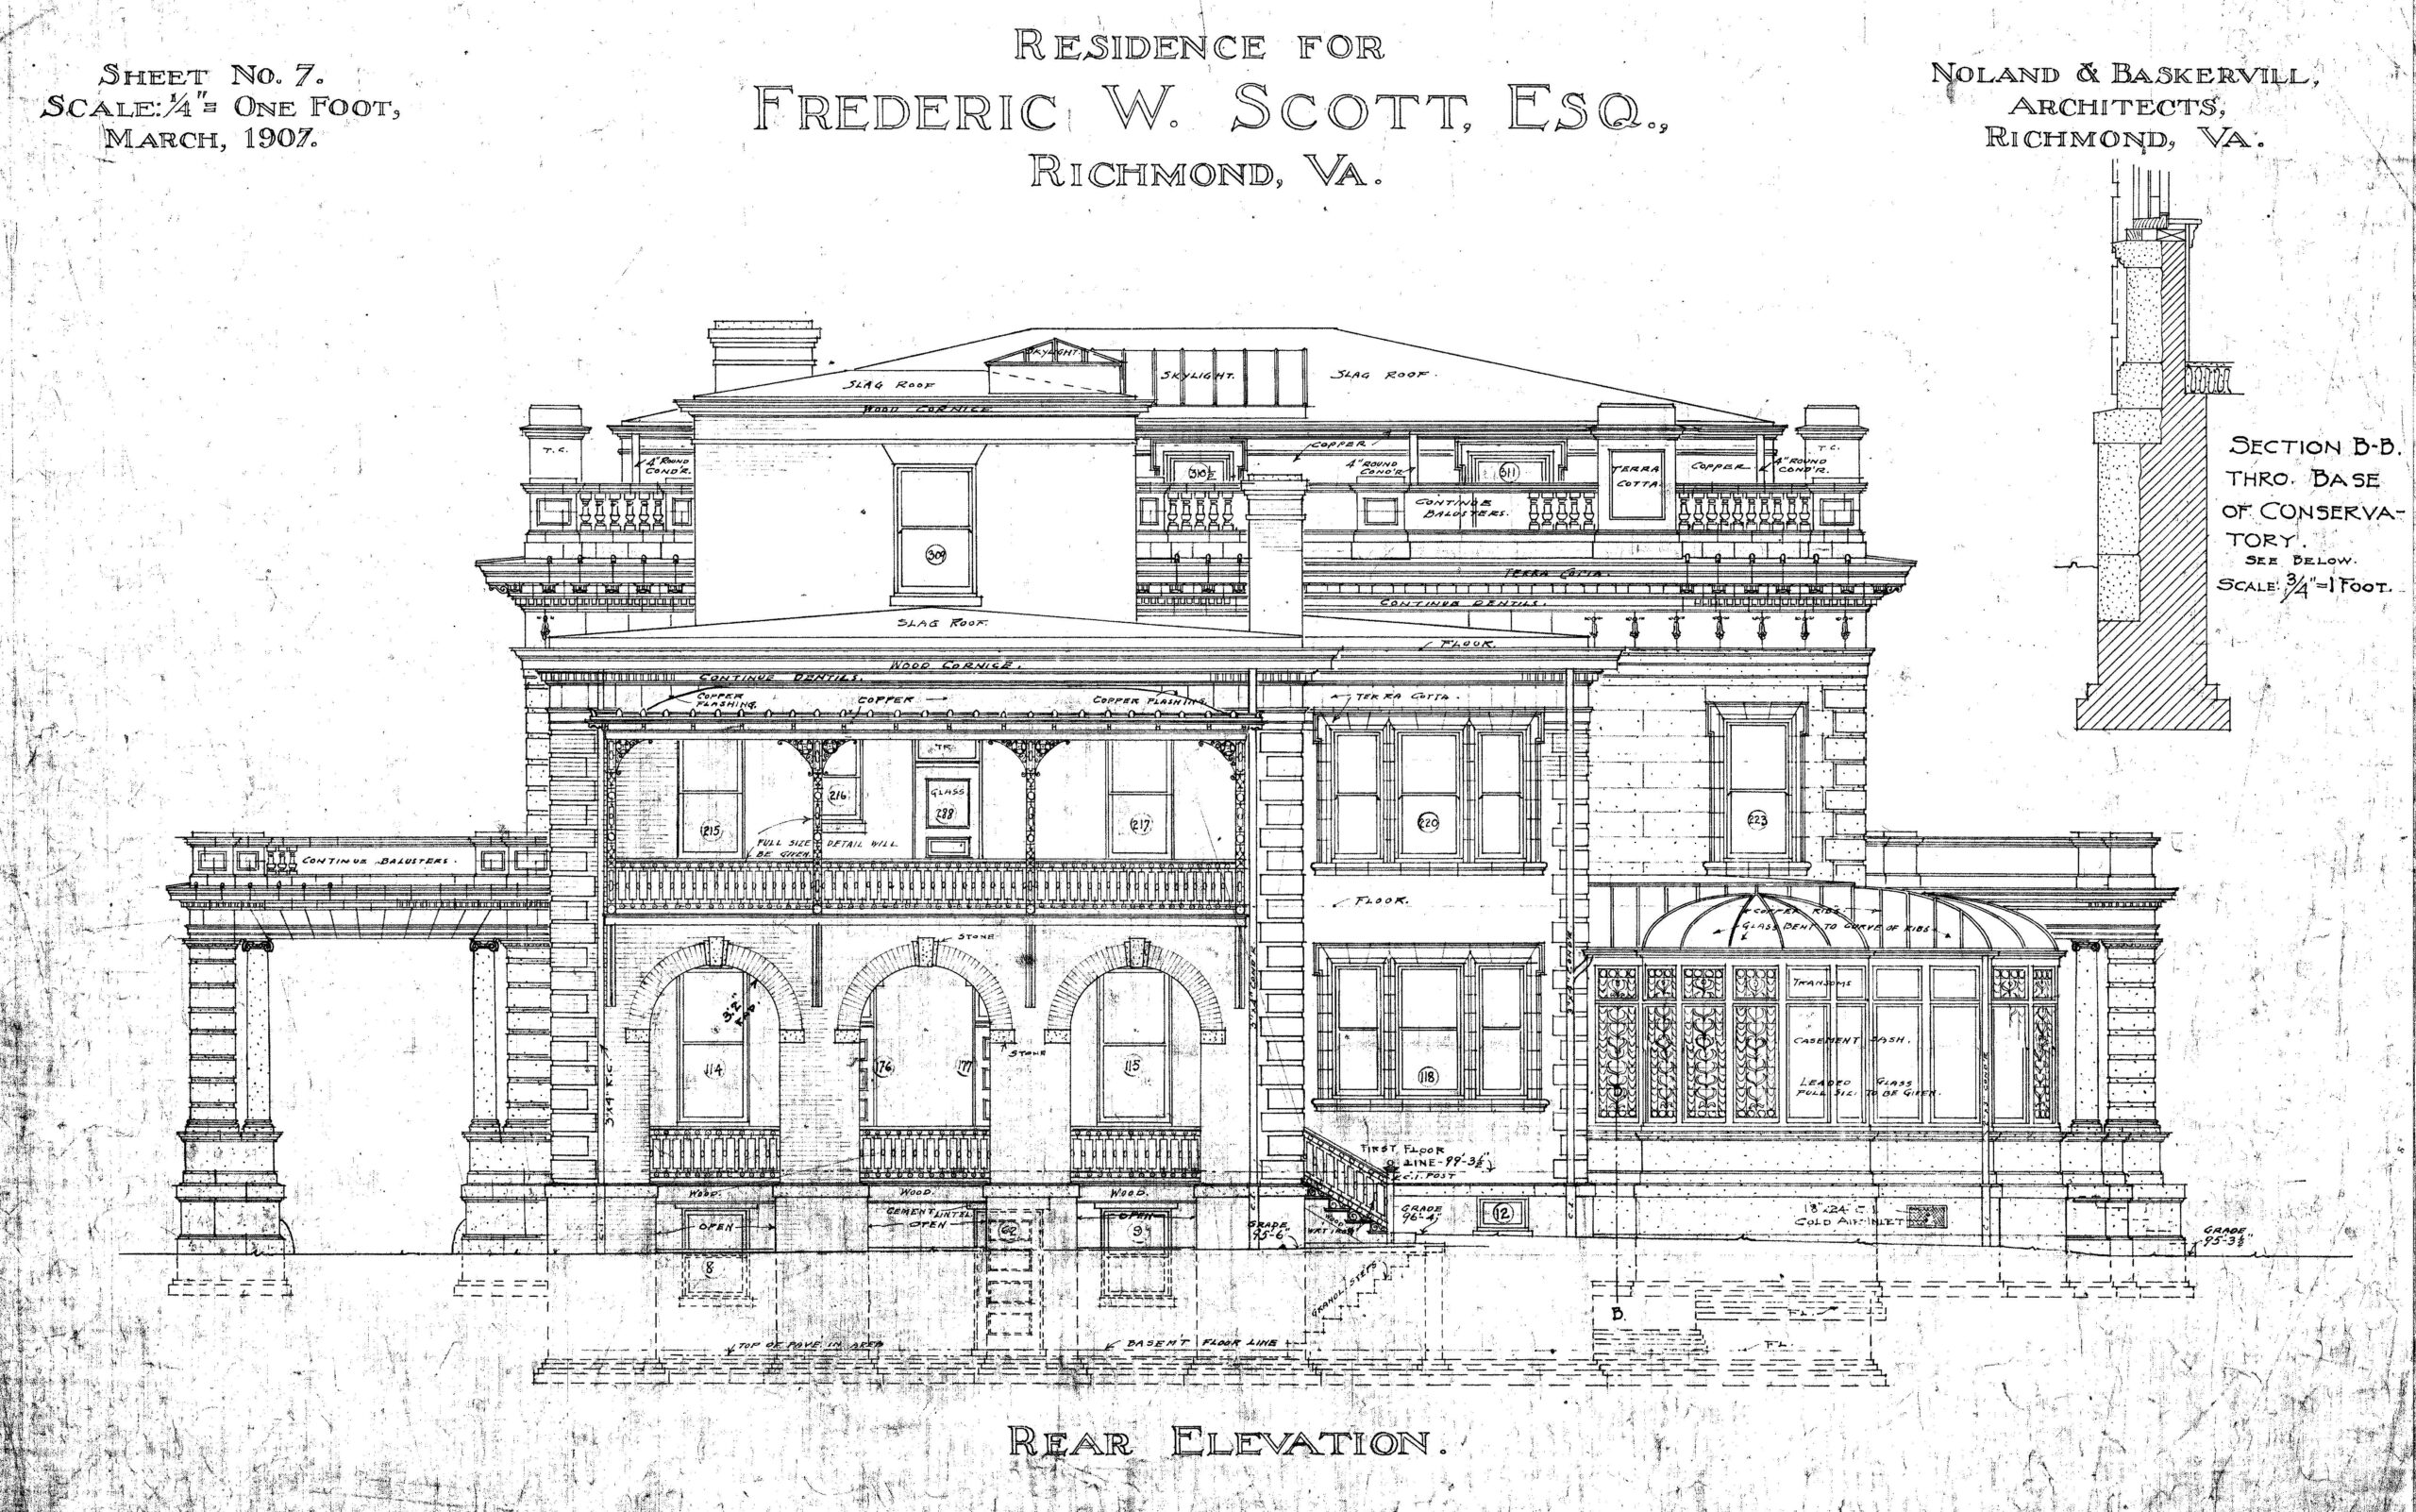 1907 drawing by Noland & Baskervill of the rear elevation of the residence for Frederick W. Scott